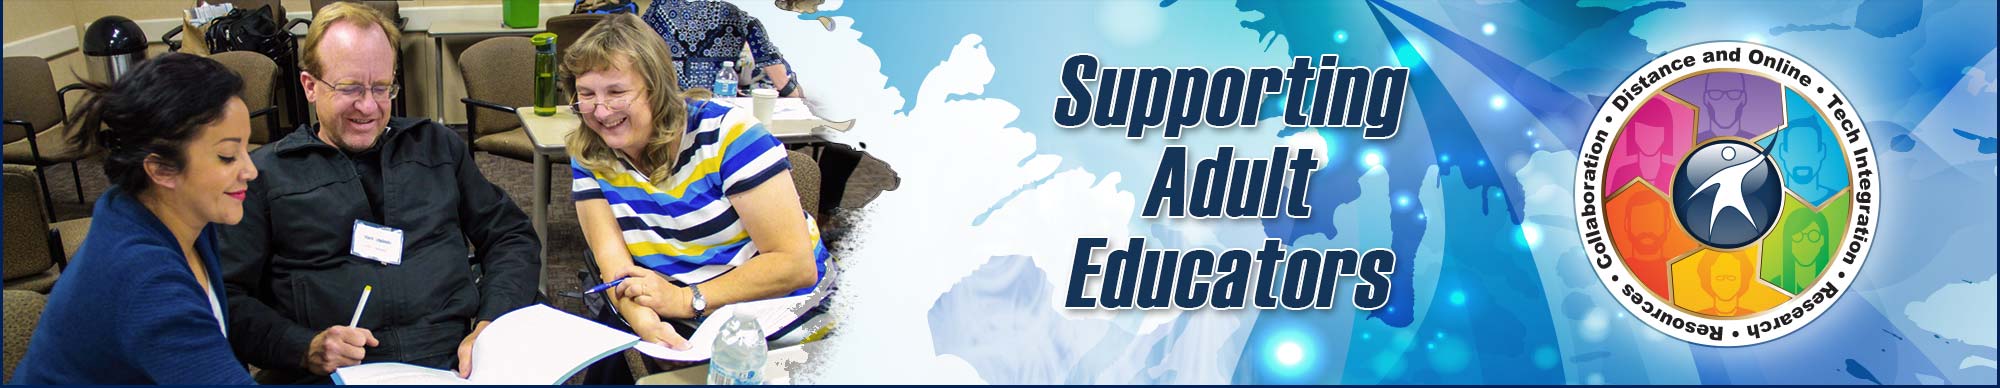 Supporting Adult Educators banner